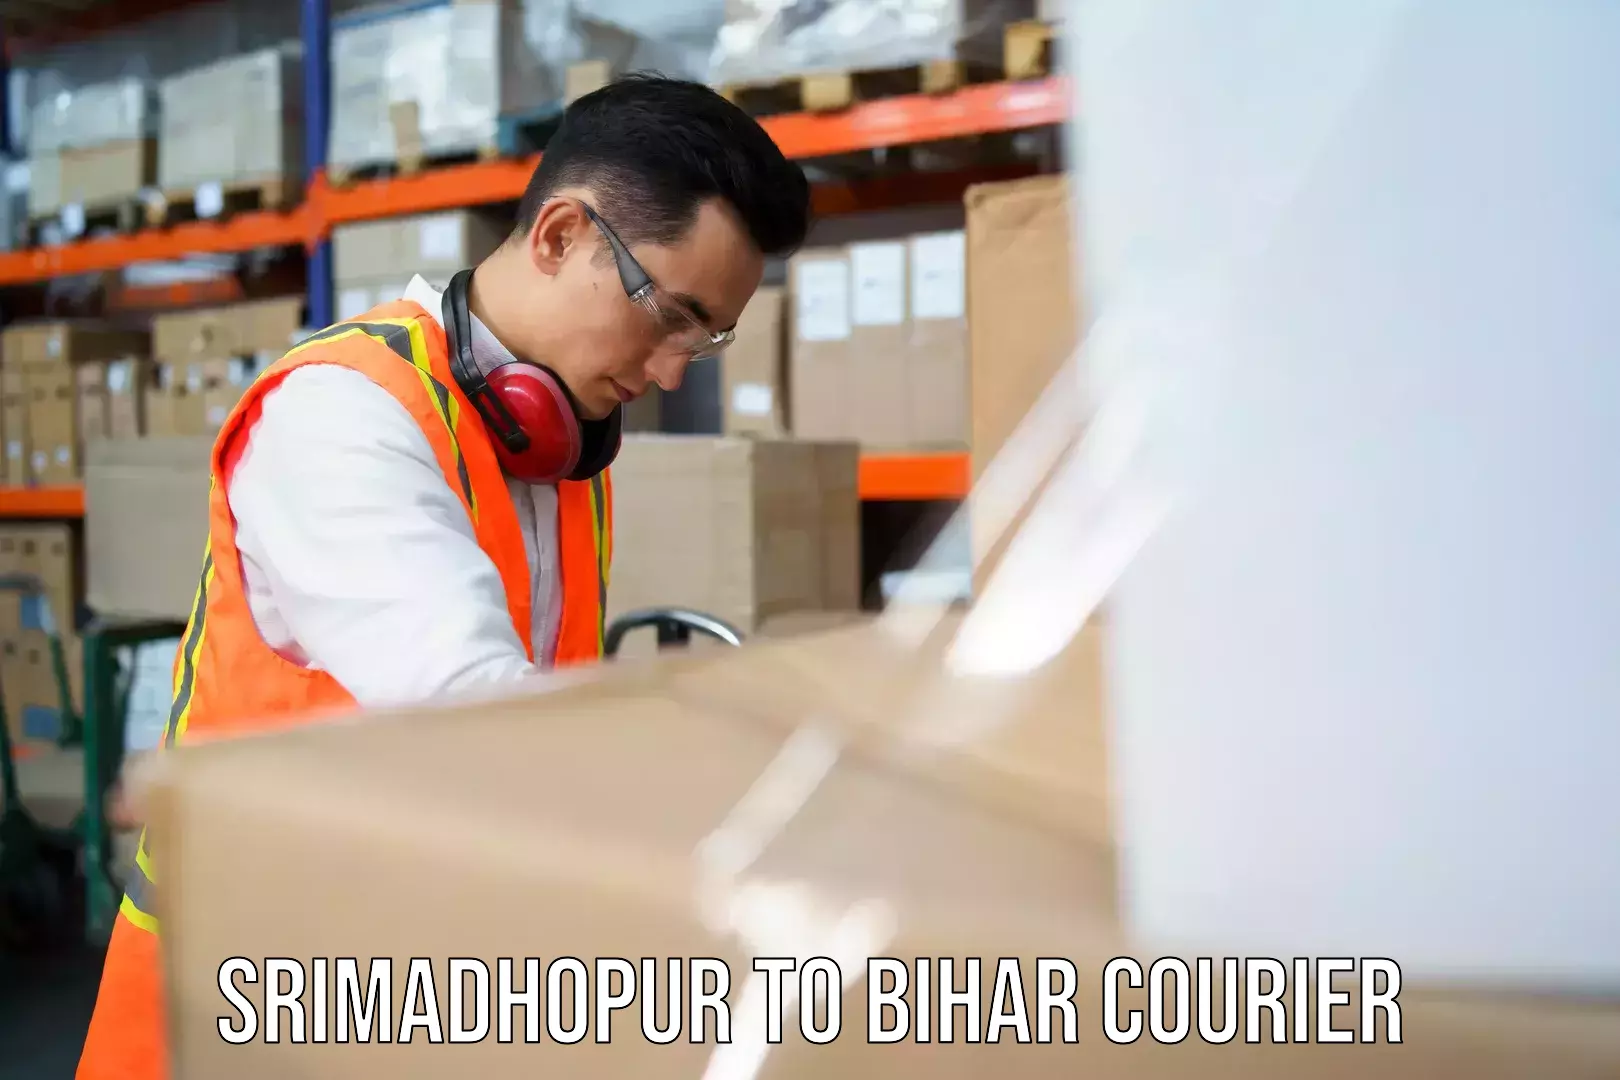 Professional courier handling Srimadhopur to Barauni